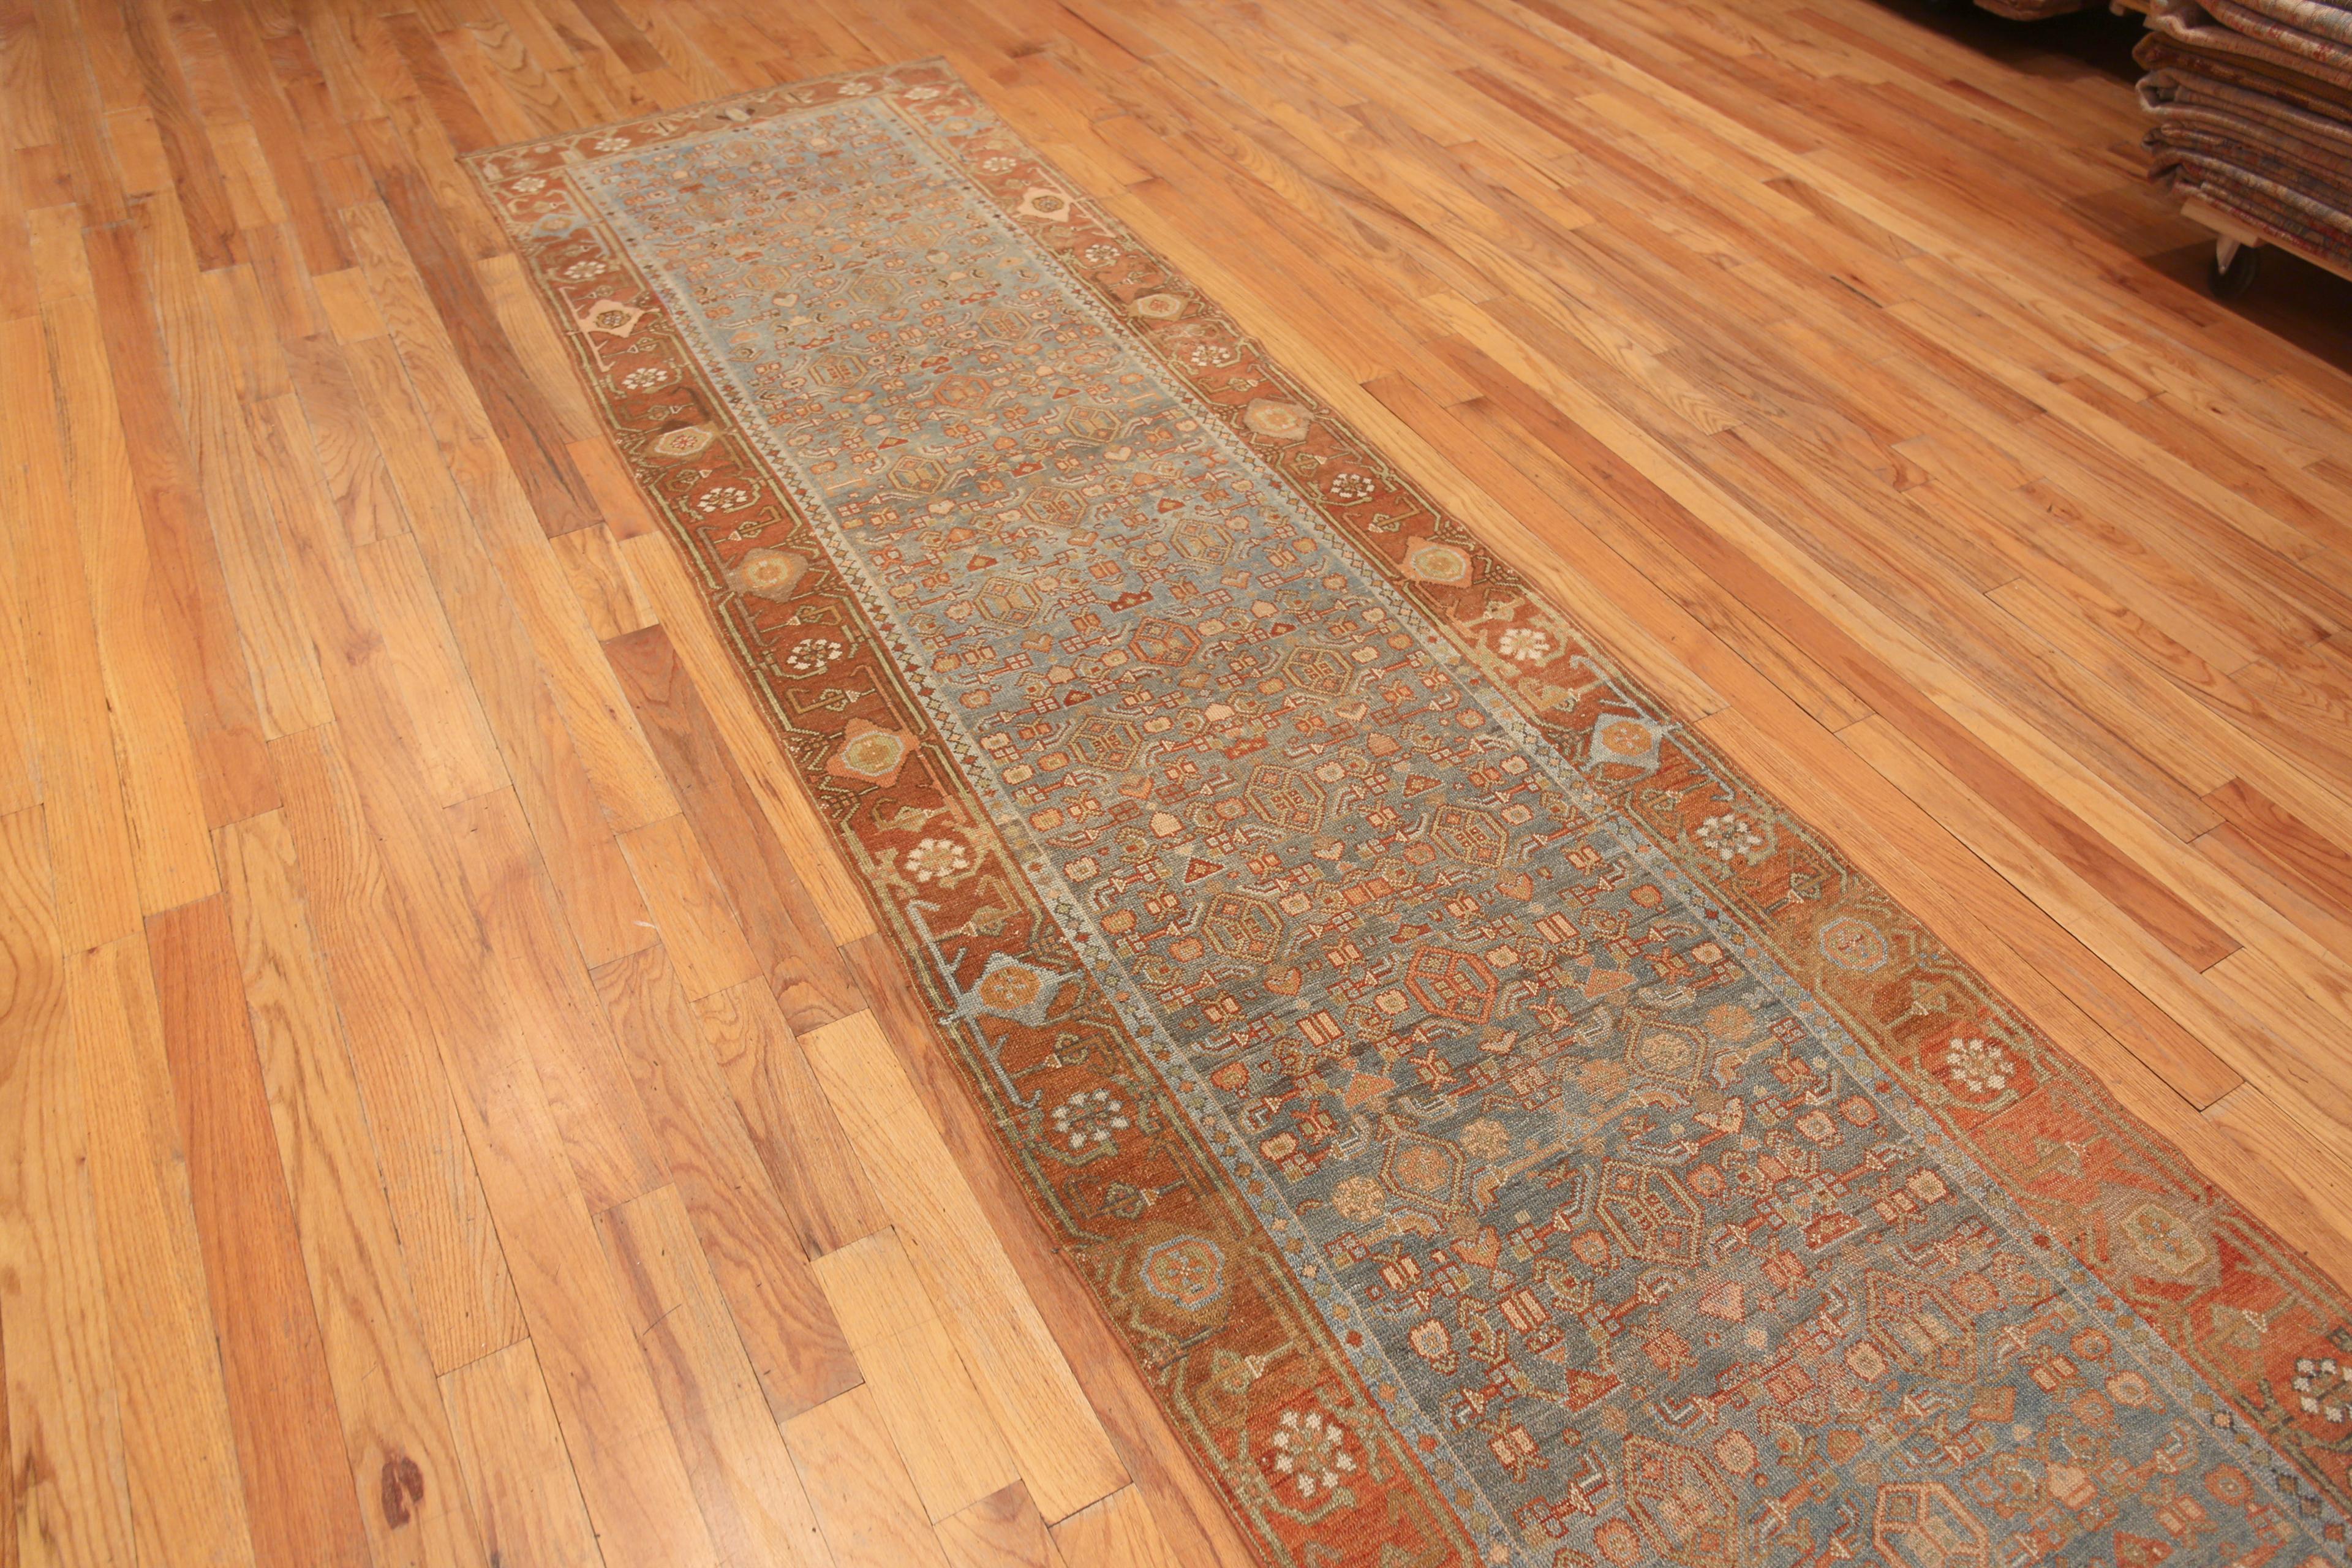 Gorgeous Antique Malayer Persian Blue Background Runner Rug 3'2